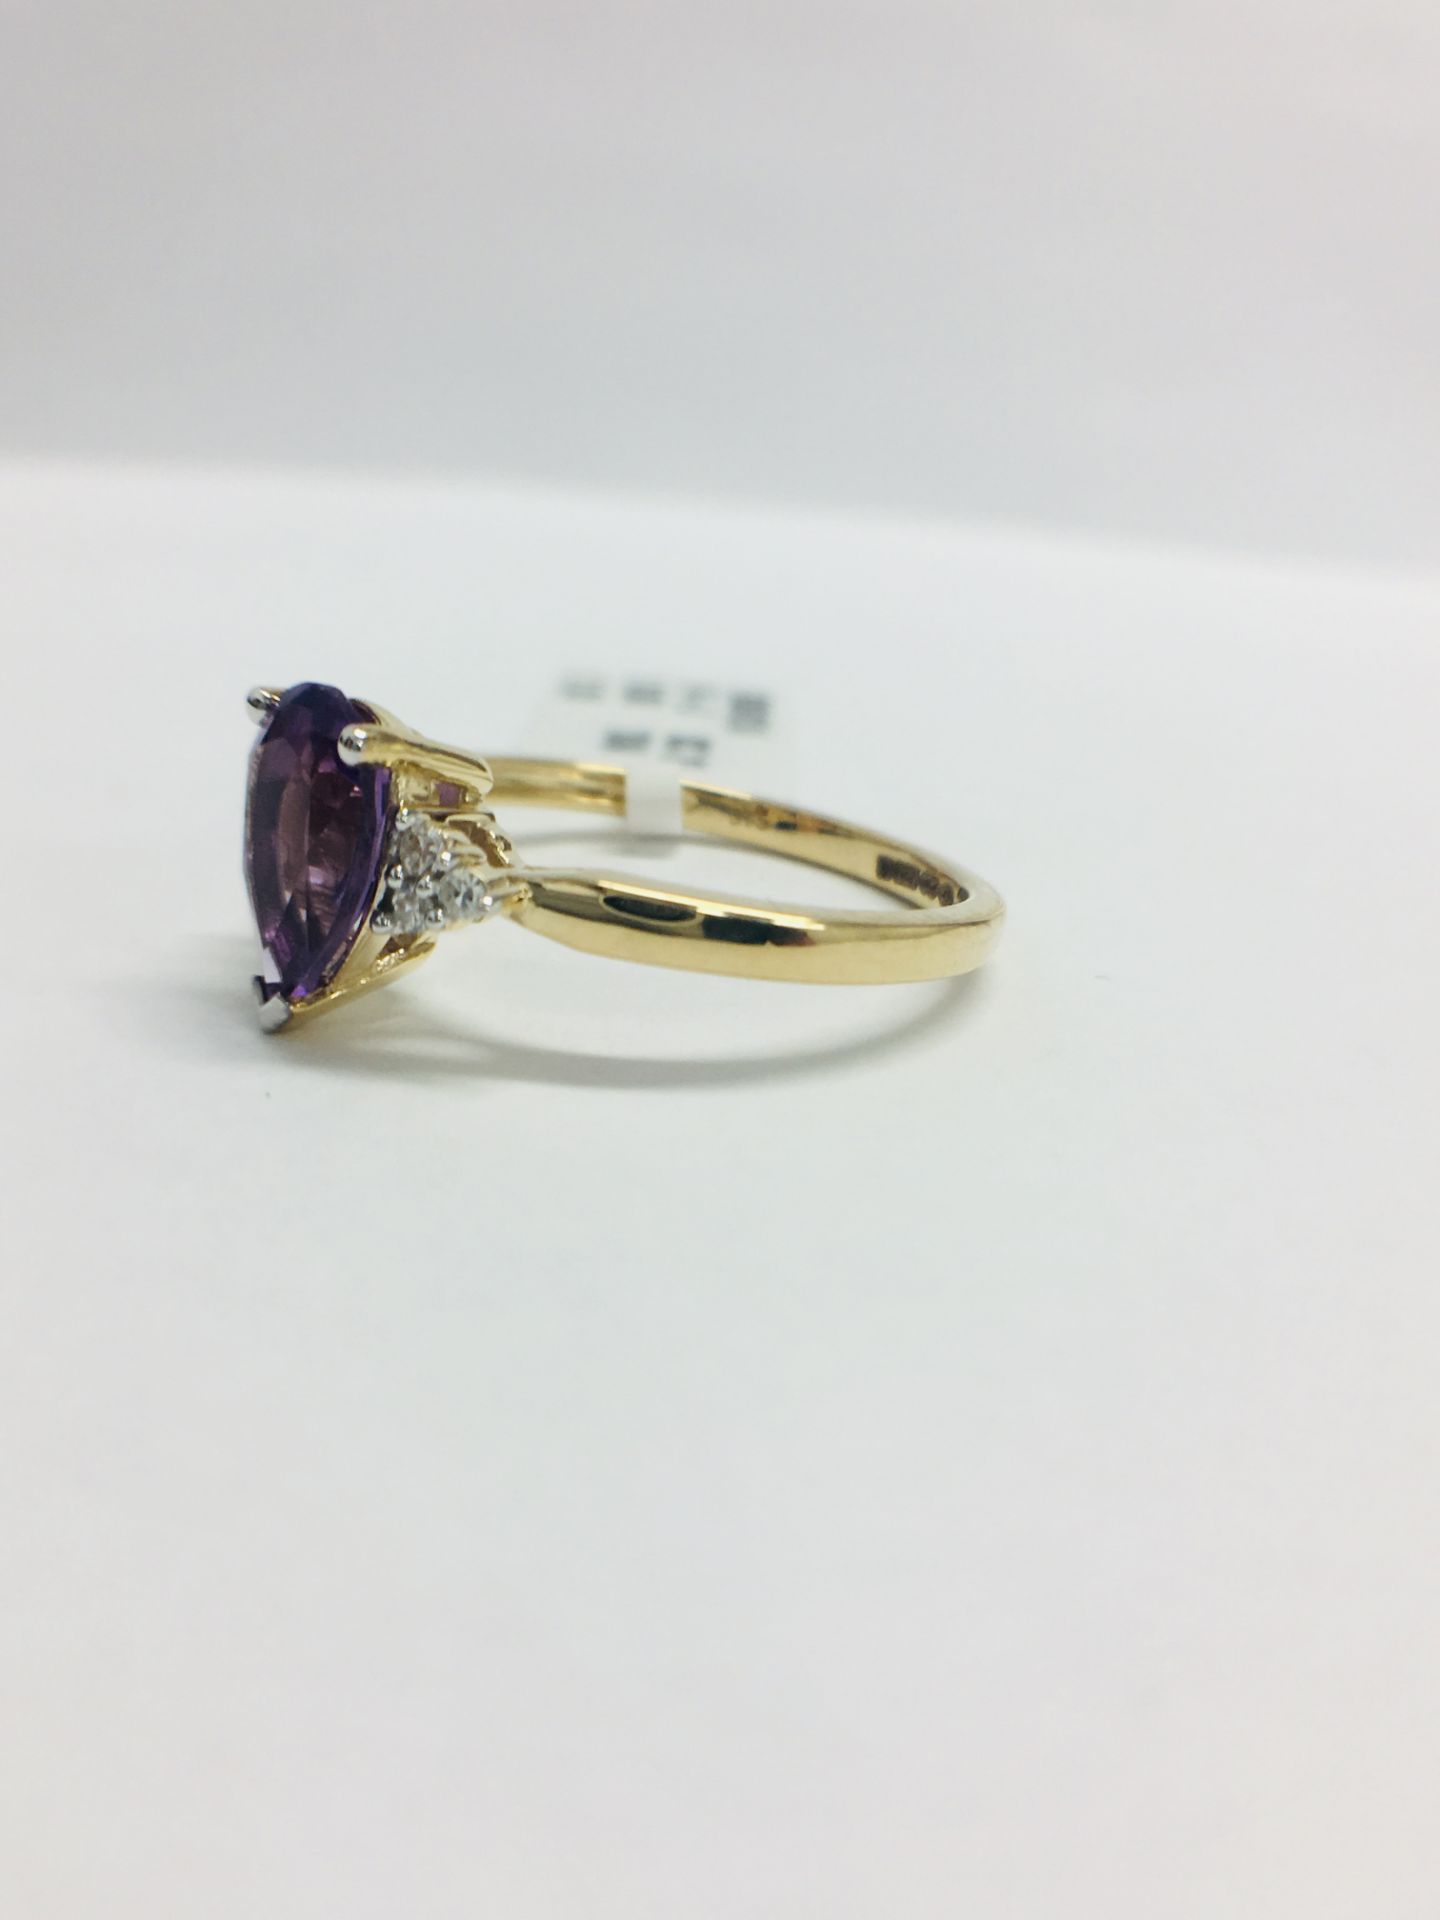 9ct Yellow Gold Amethyst Diamond Navette Style Dress Ring - Image 2 of 10